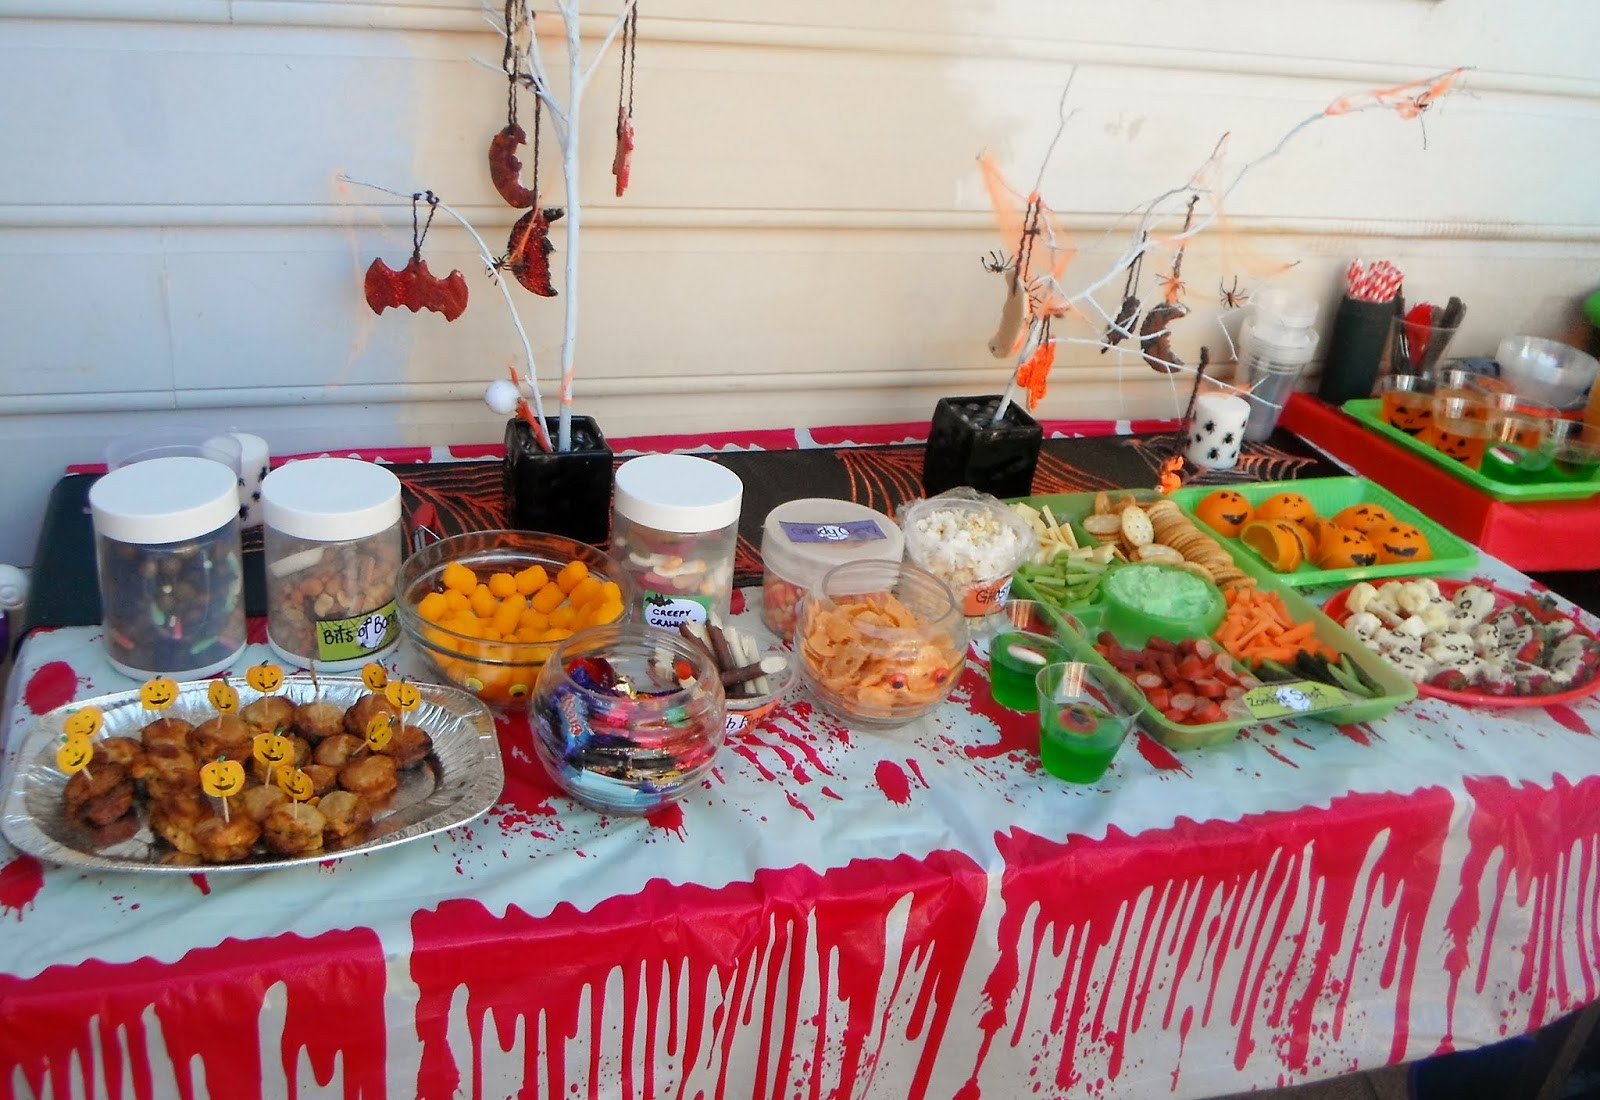 Cool Party Food Ideas
 Adventures at home with Mum Halloween Party Food